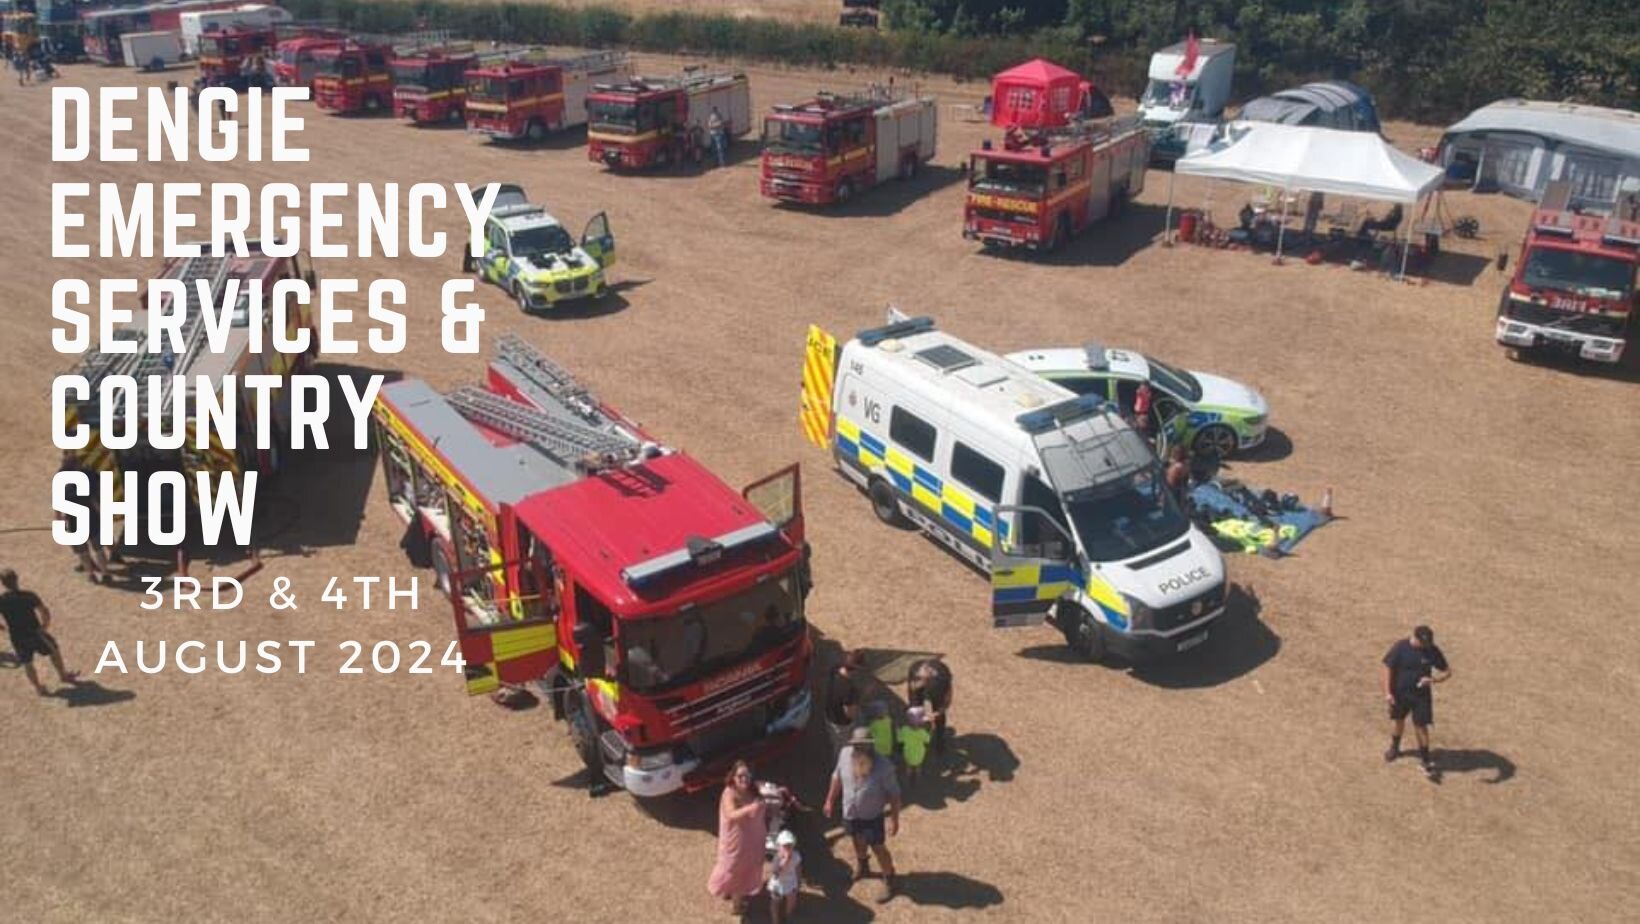 Dengie Emergency Services and Country Show 2024